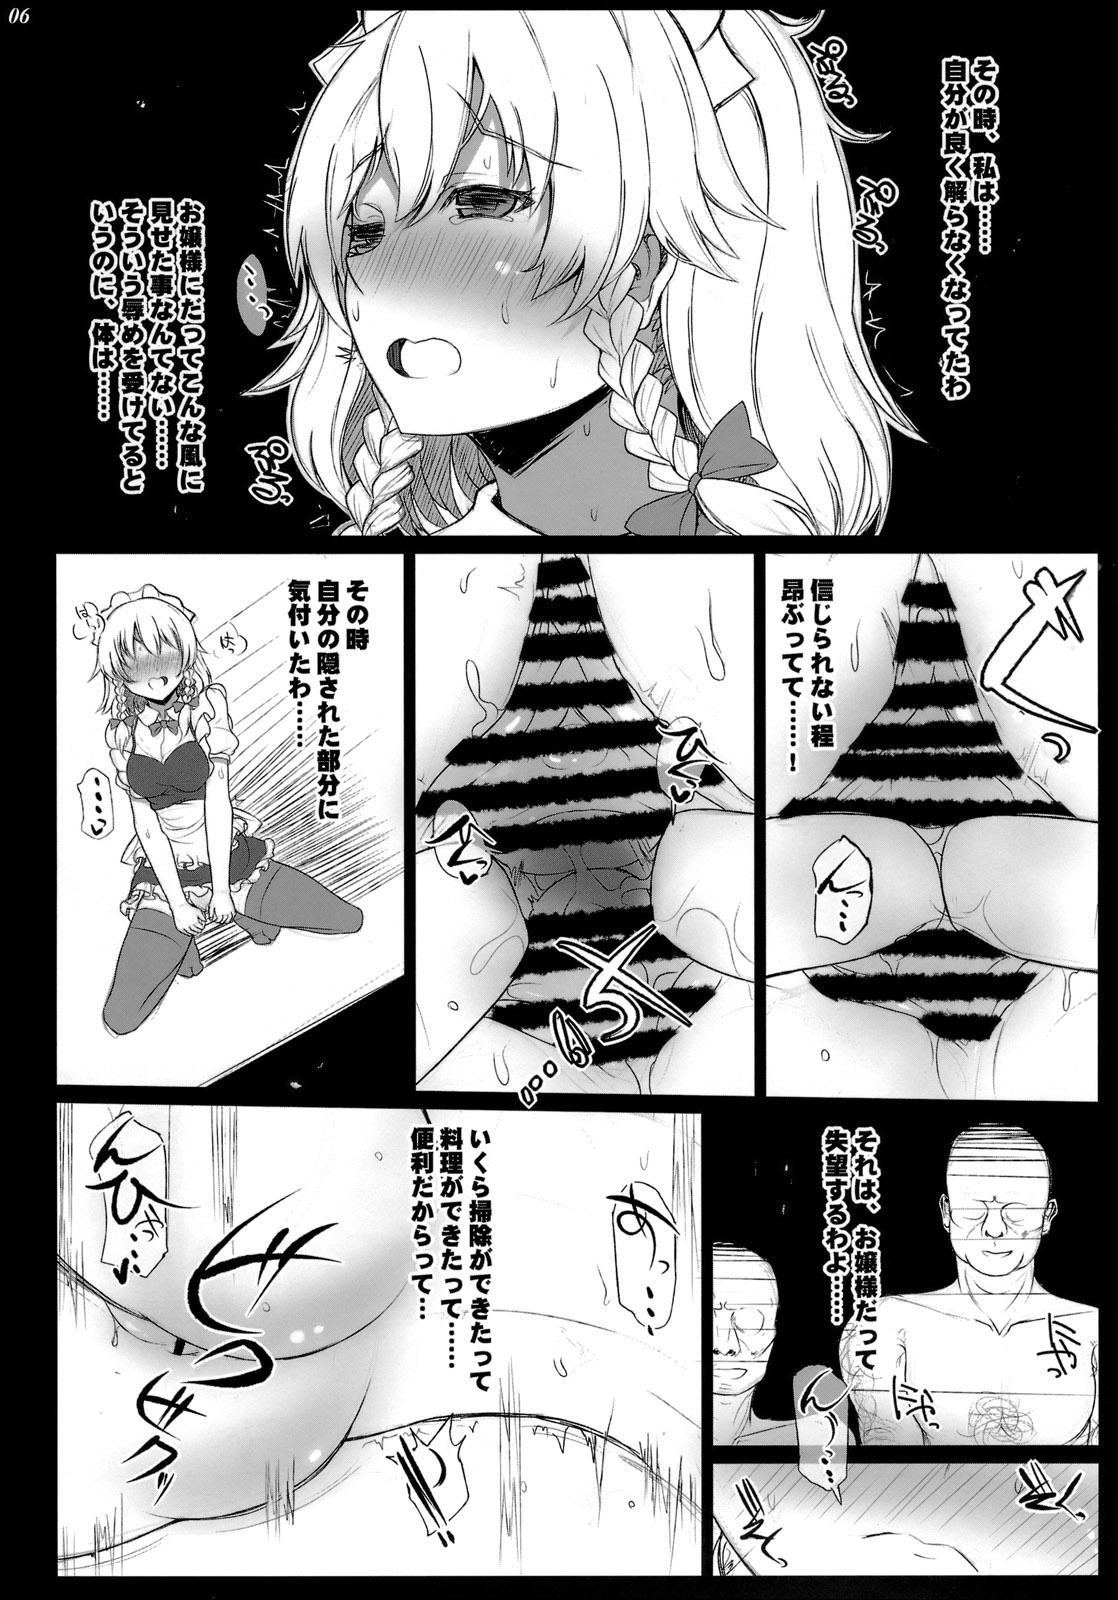 Skype LEAVE HOUSE - Touhou project Celebrity Porn - Page 5